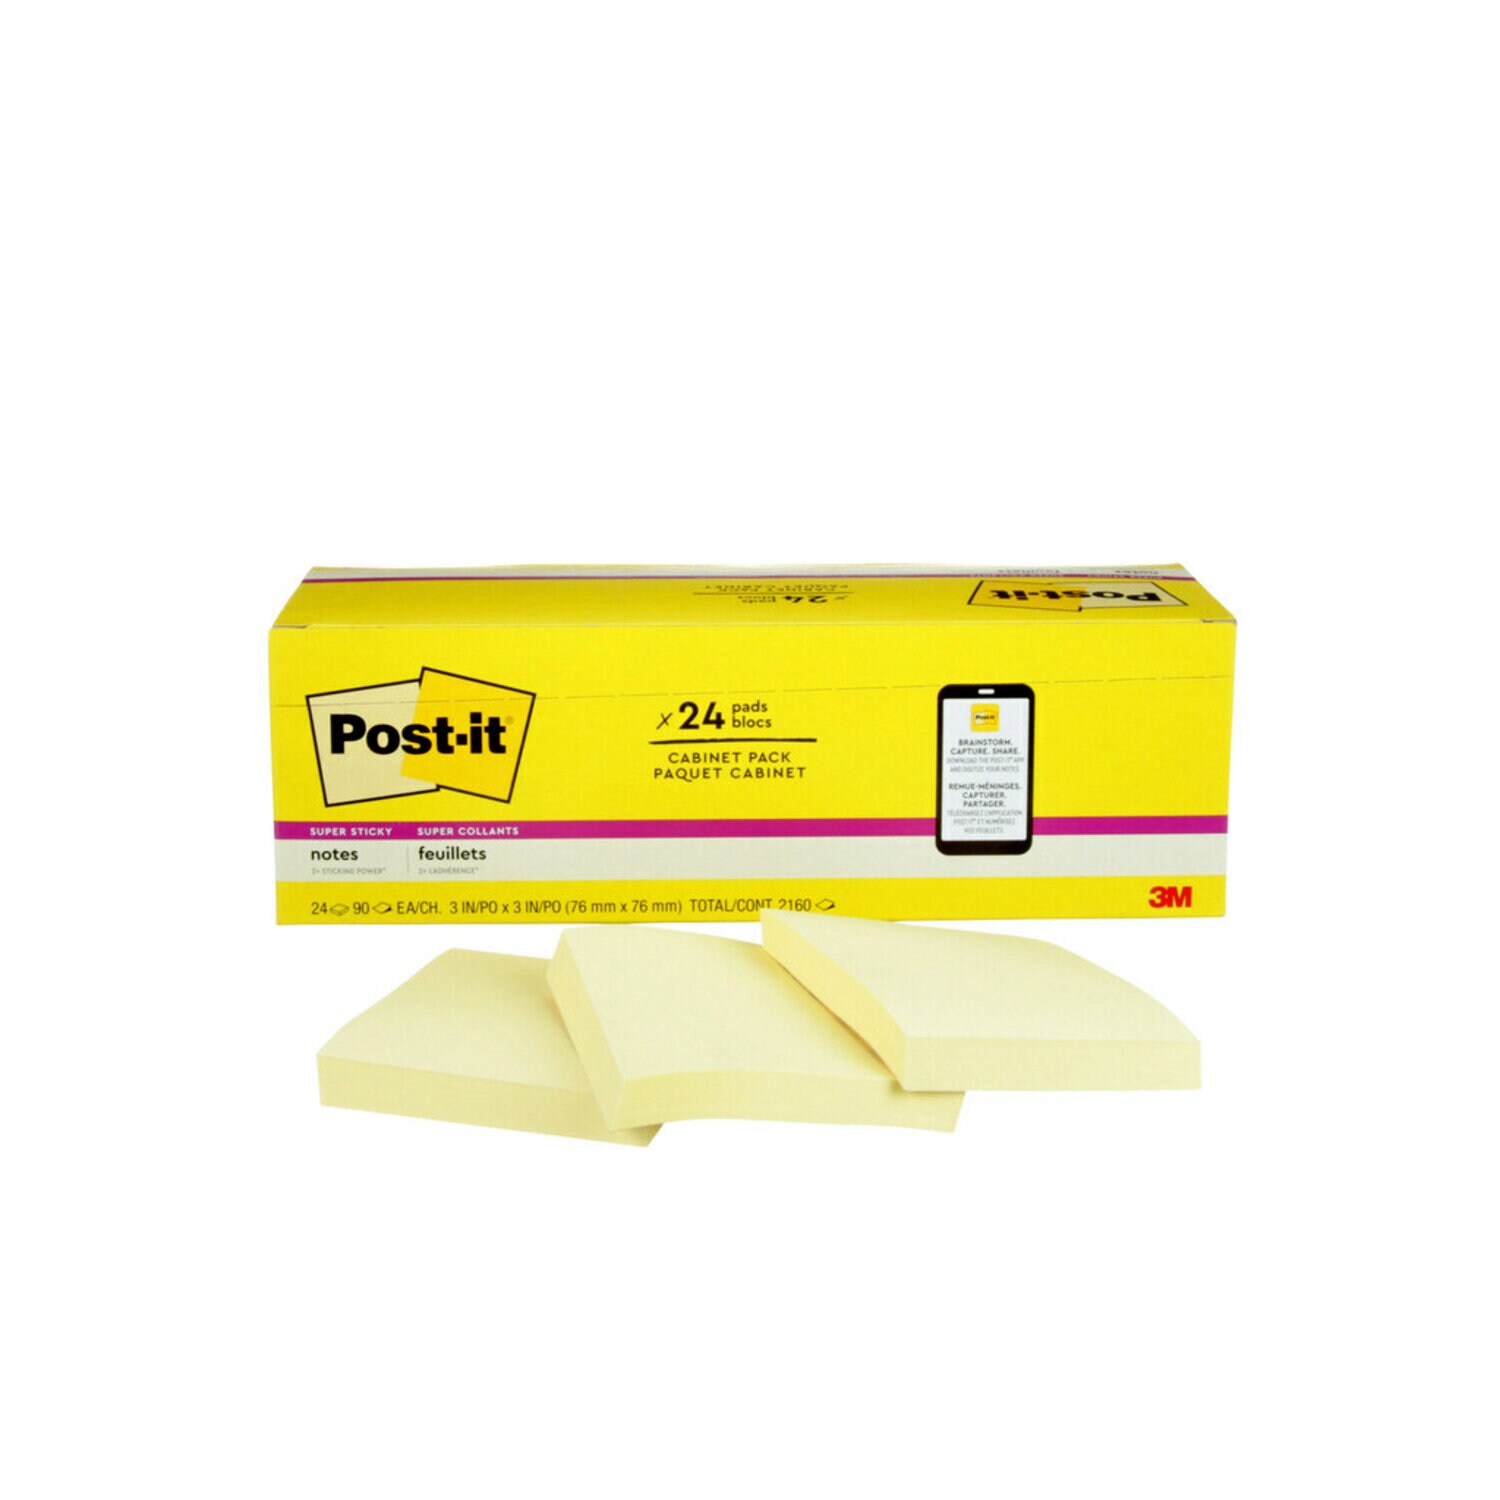 7100063858 - Post-it Super Sticky Notes 654-24SSCP, 3 in x 3 in (76.2 mm x 76.2 mm)
Canary